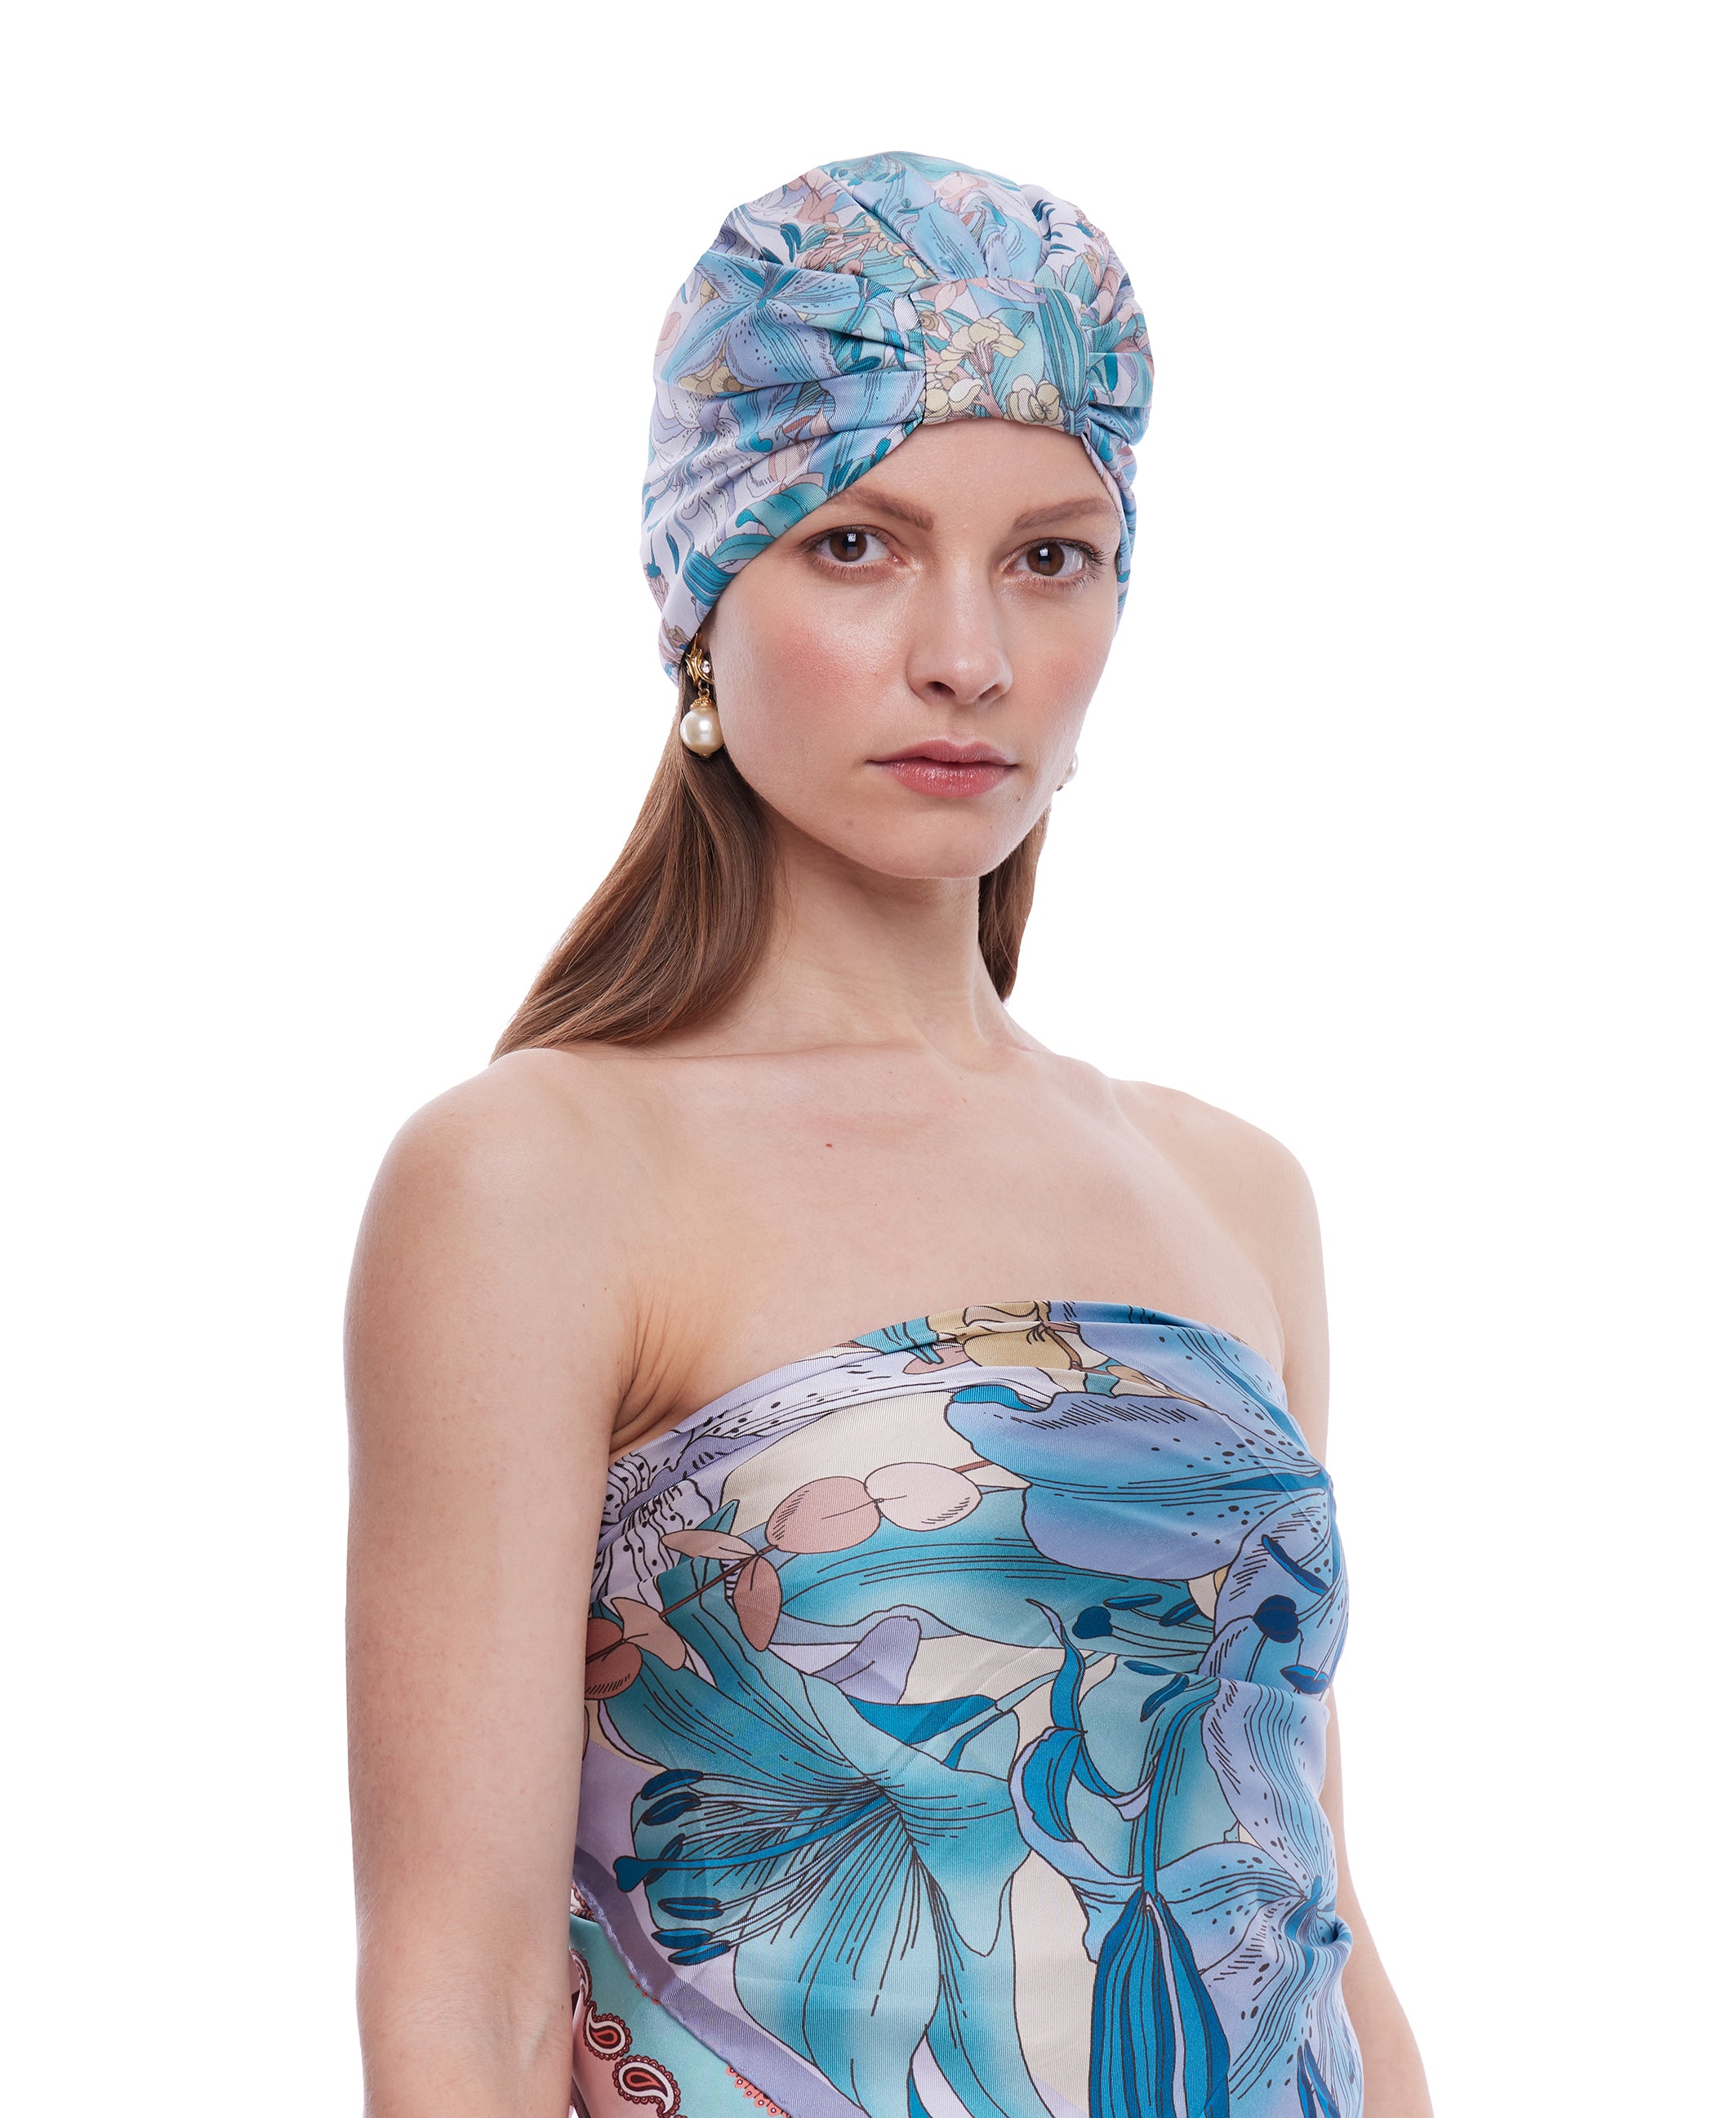 The Lily Bouquet Silk Turban